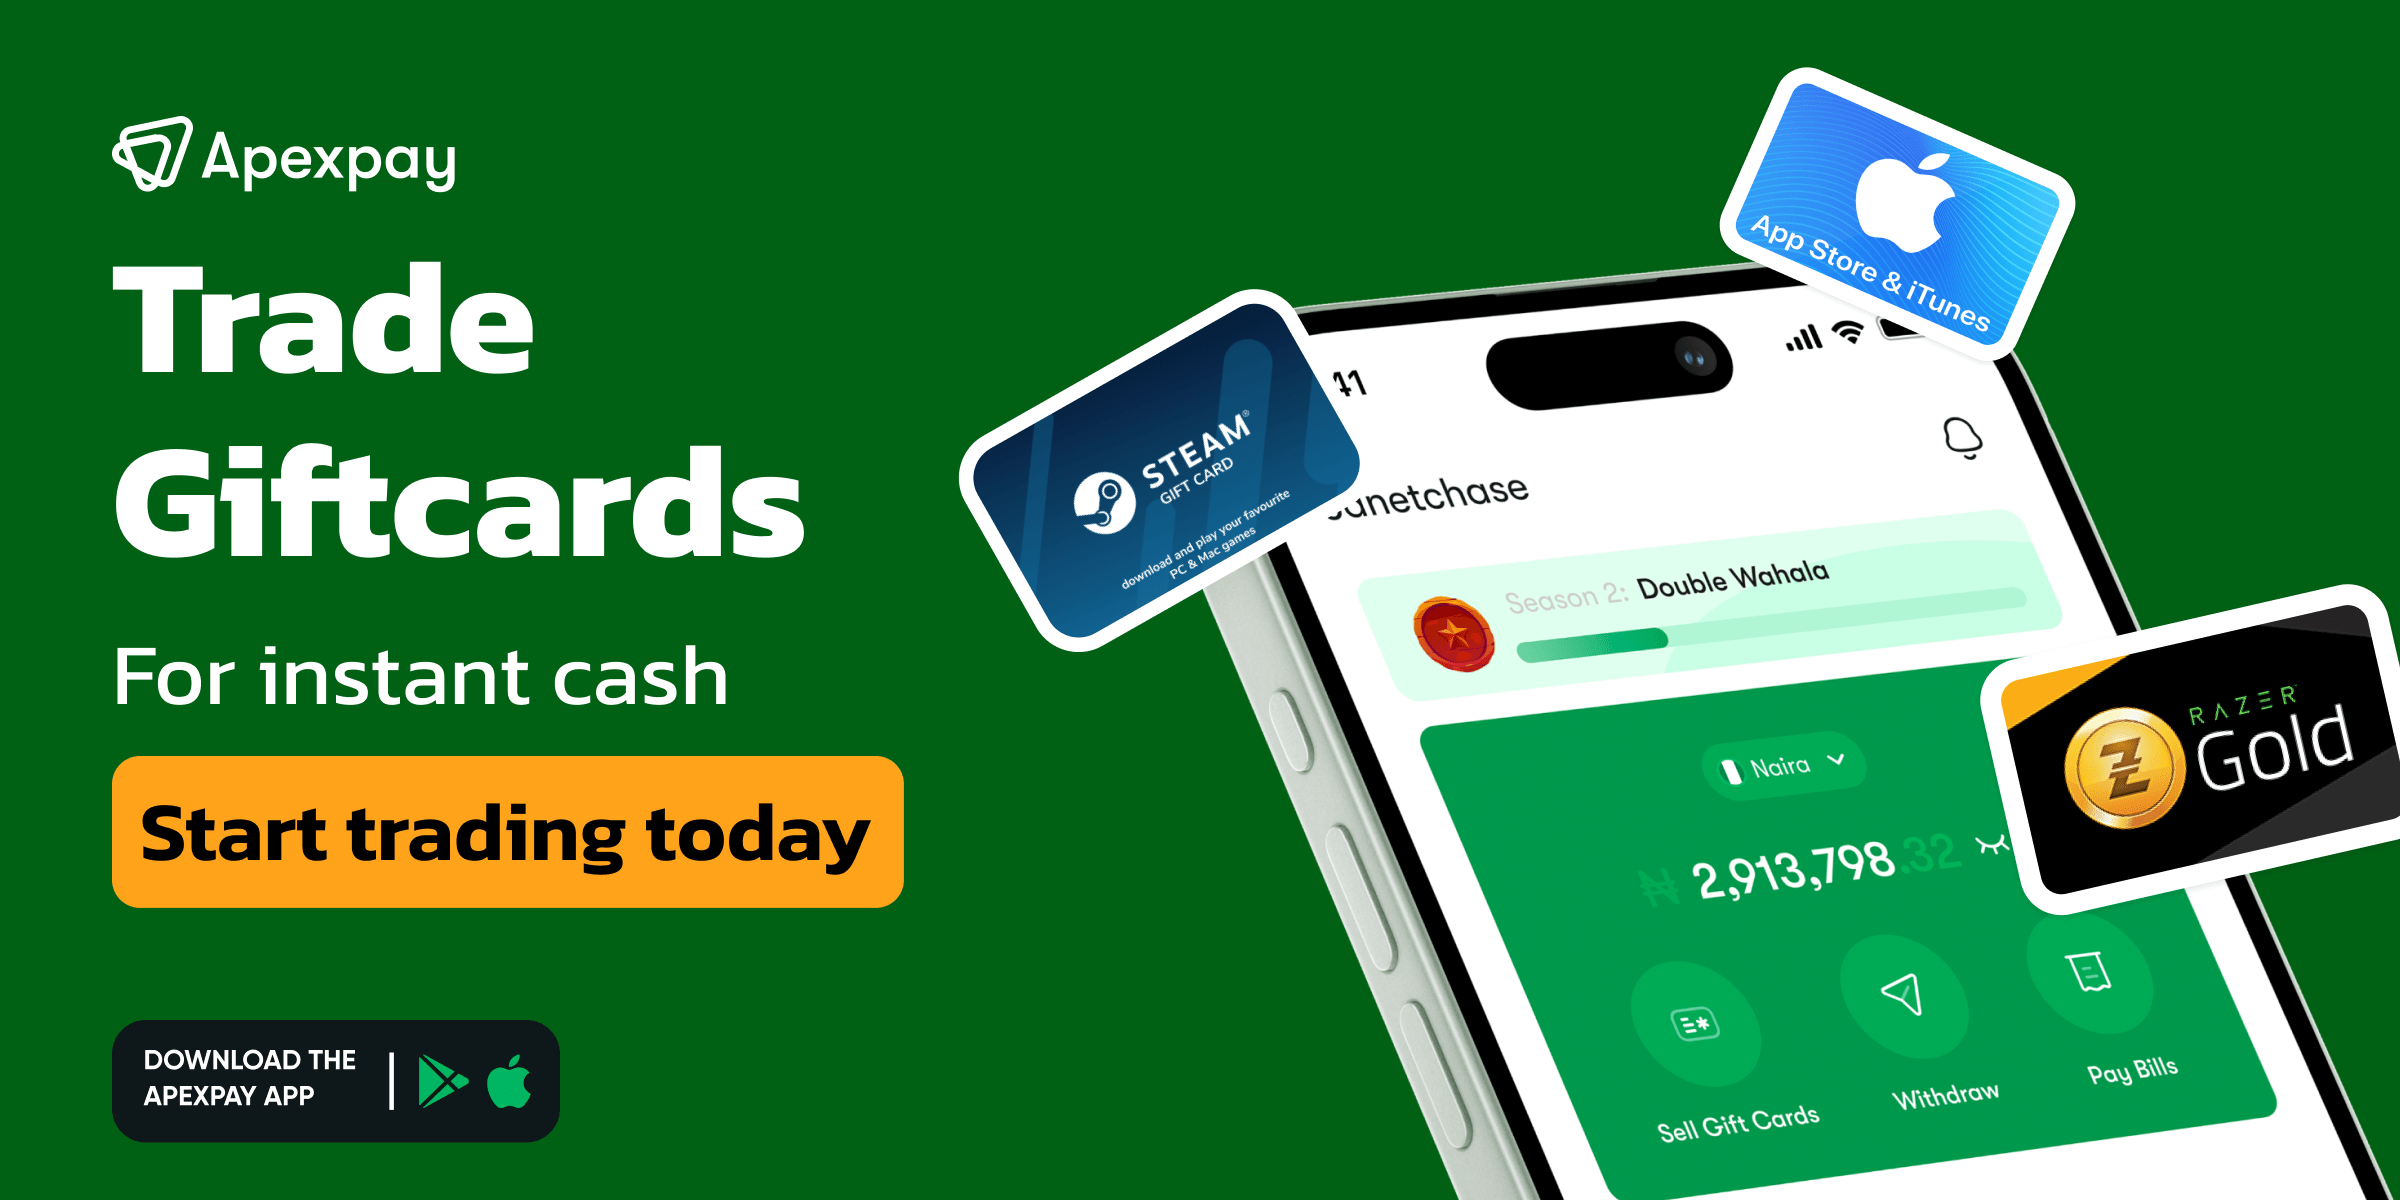 Trade Gift Cards for Instant Cash